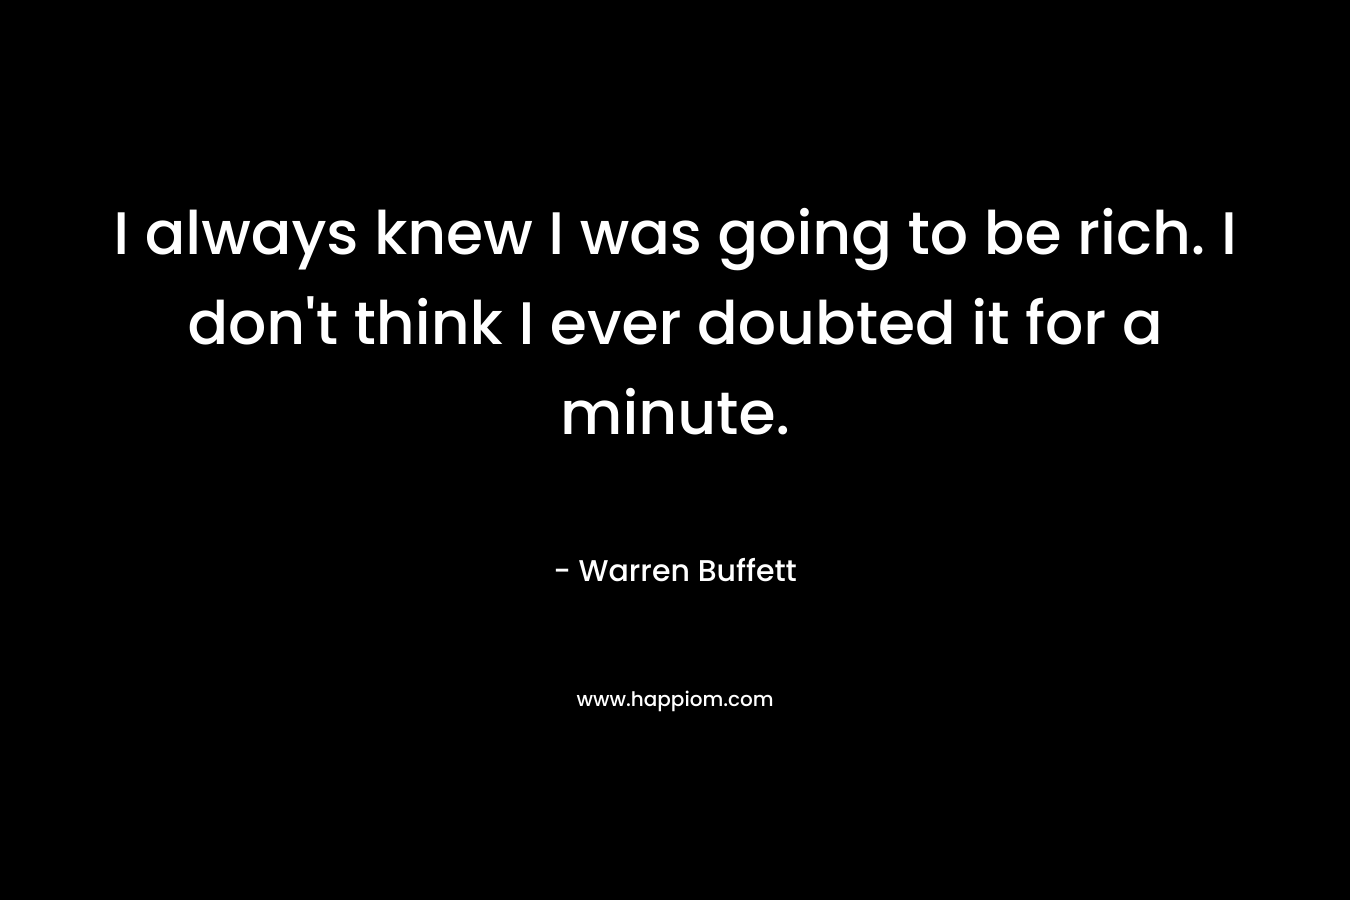 I always knew I was going to be rich. I don’t think I ever doubted it for a minute.  – Warren Buffett